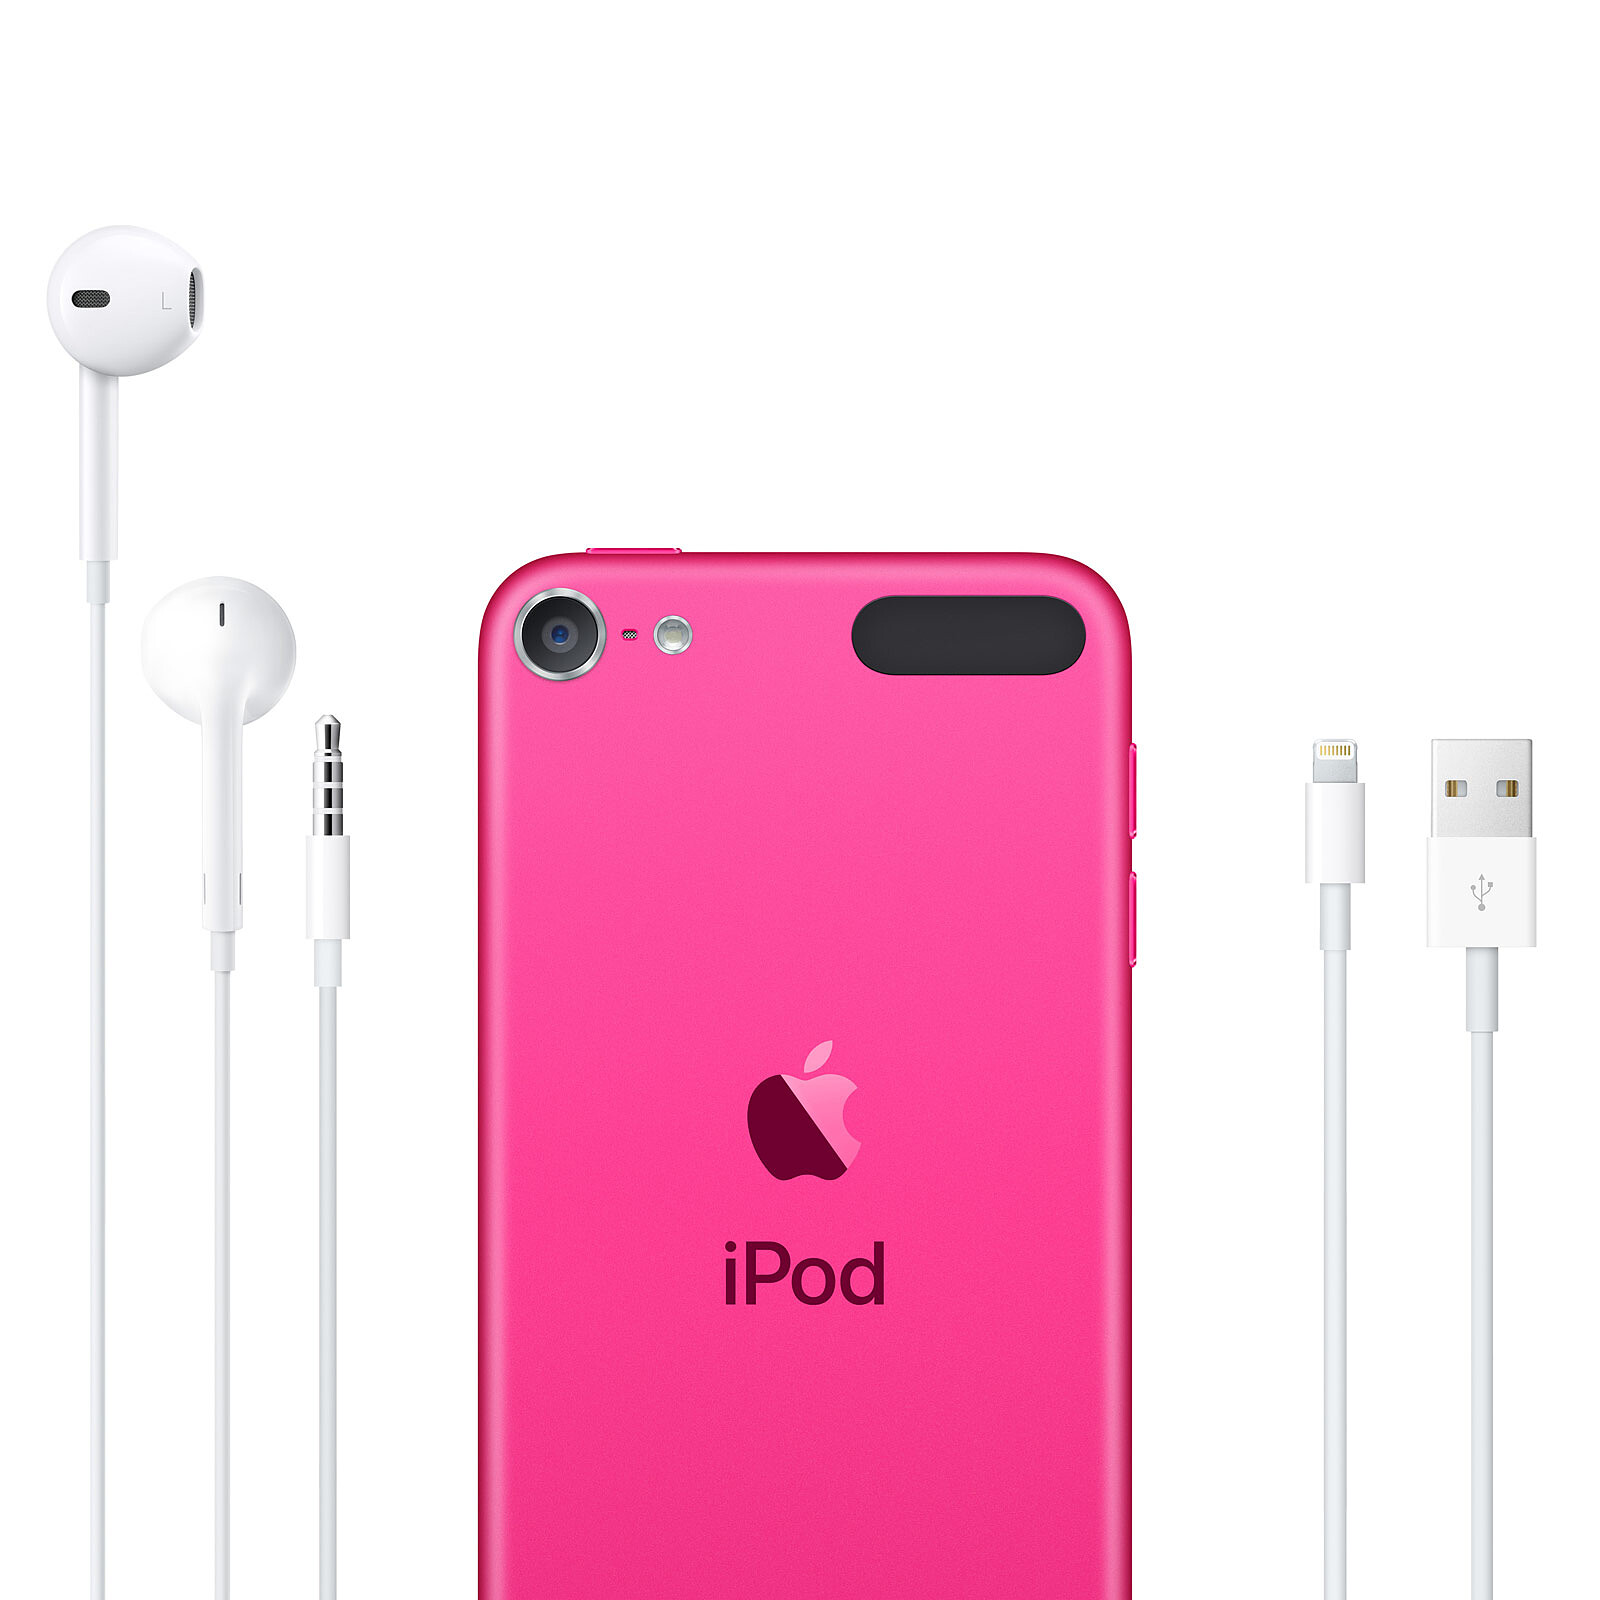 Eigendom Archeologisch Afrikaanse Apple iPod touch (2019) 32 GB Pink - MP3 player & iPod Apple on LDLC | Holy  Moley